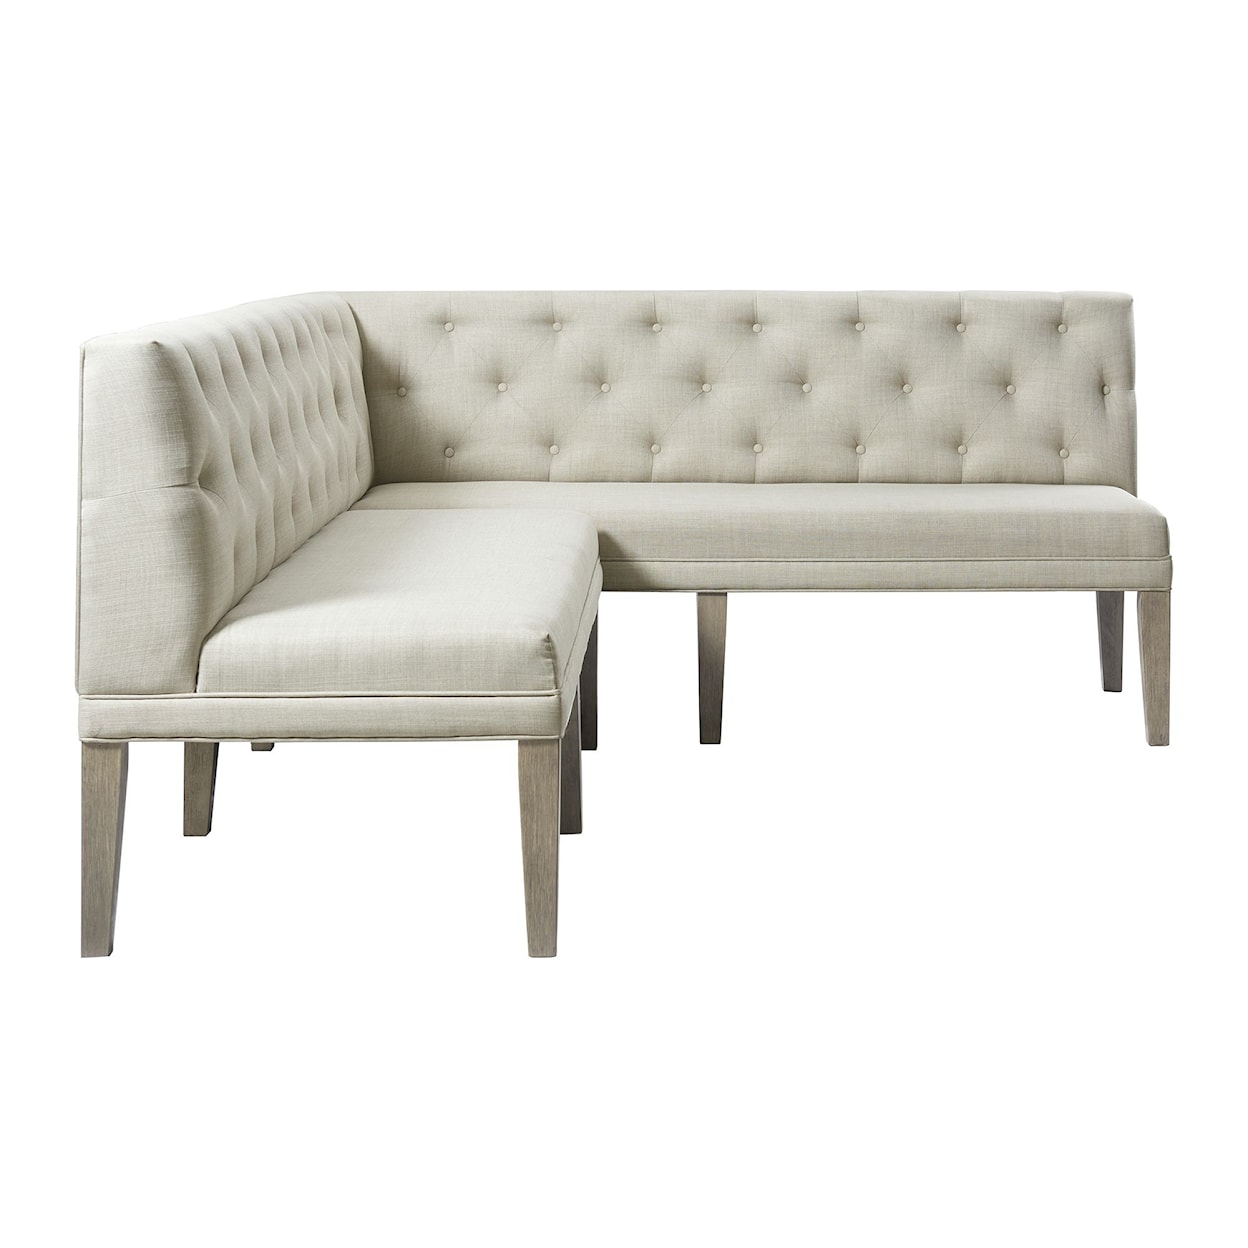 Elements Peyton Sectional Dining Bench